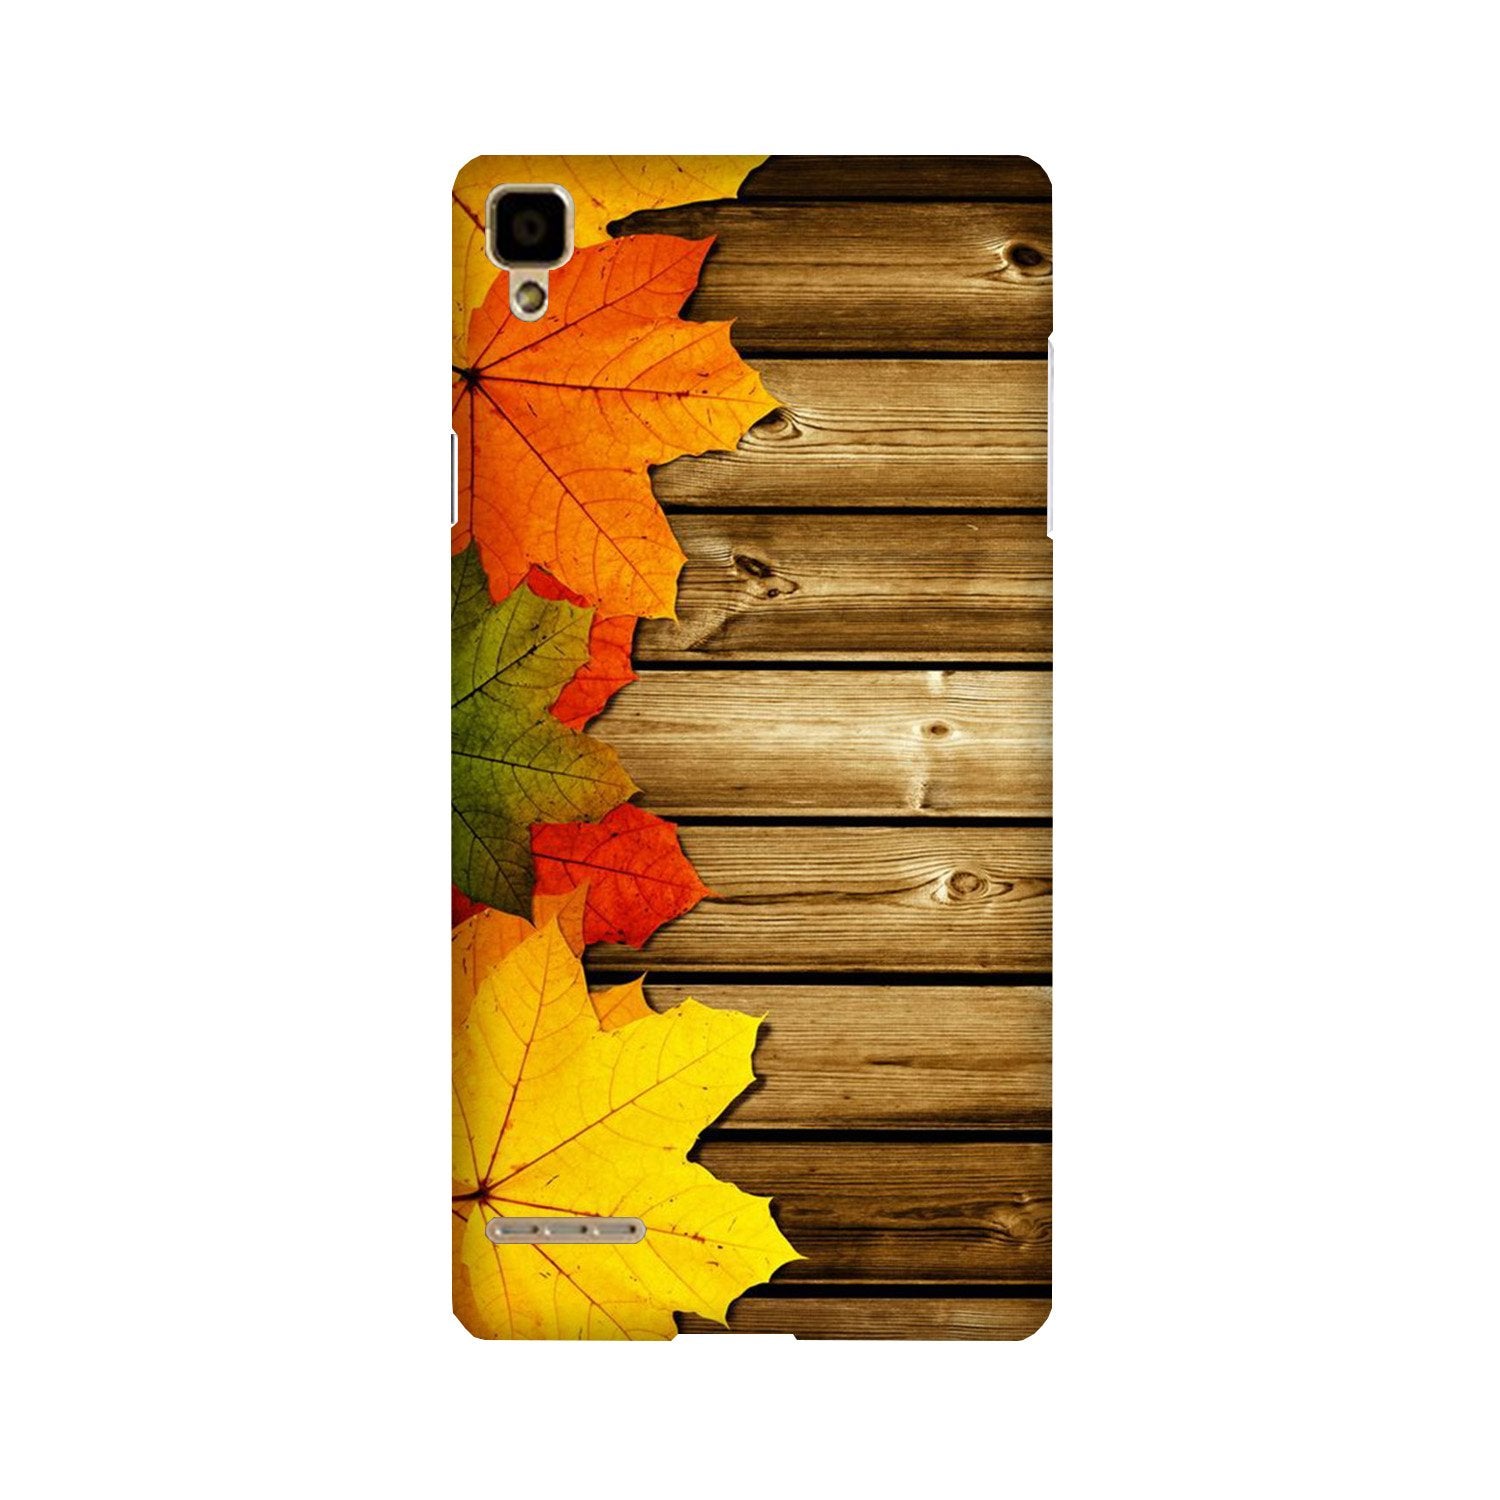 Wooden look3 Case for Oppo F1